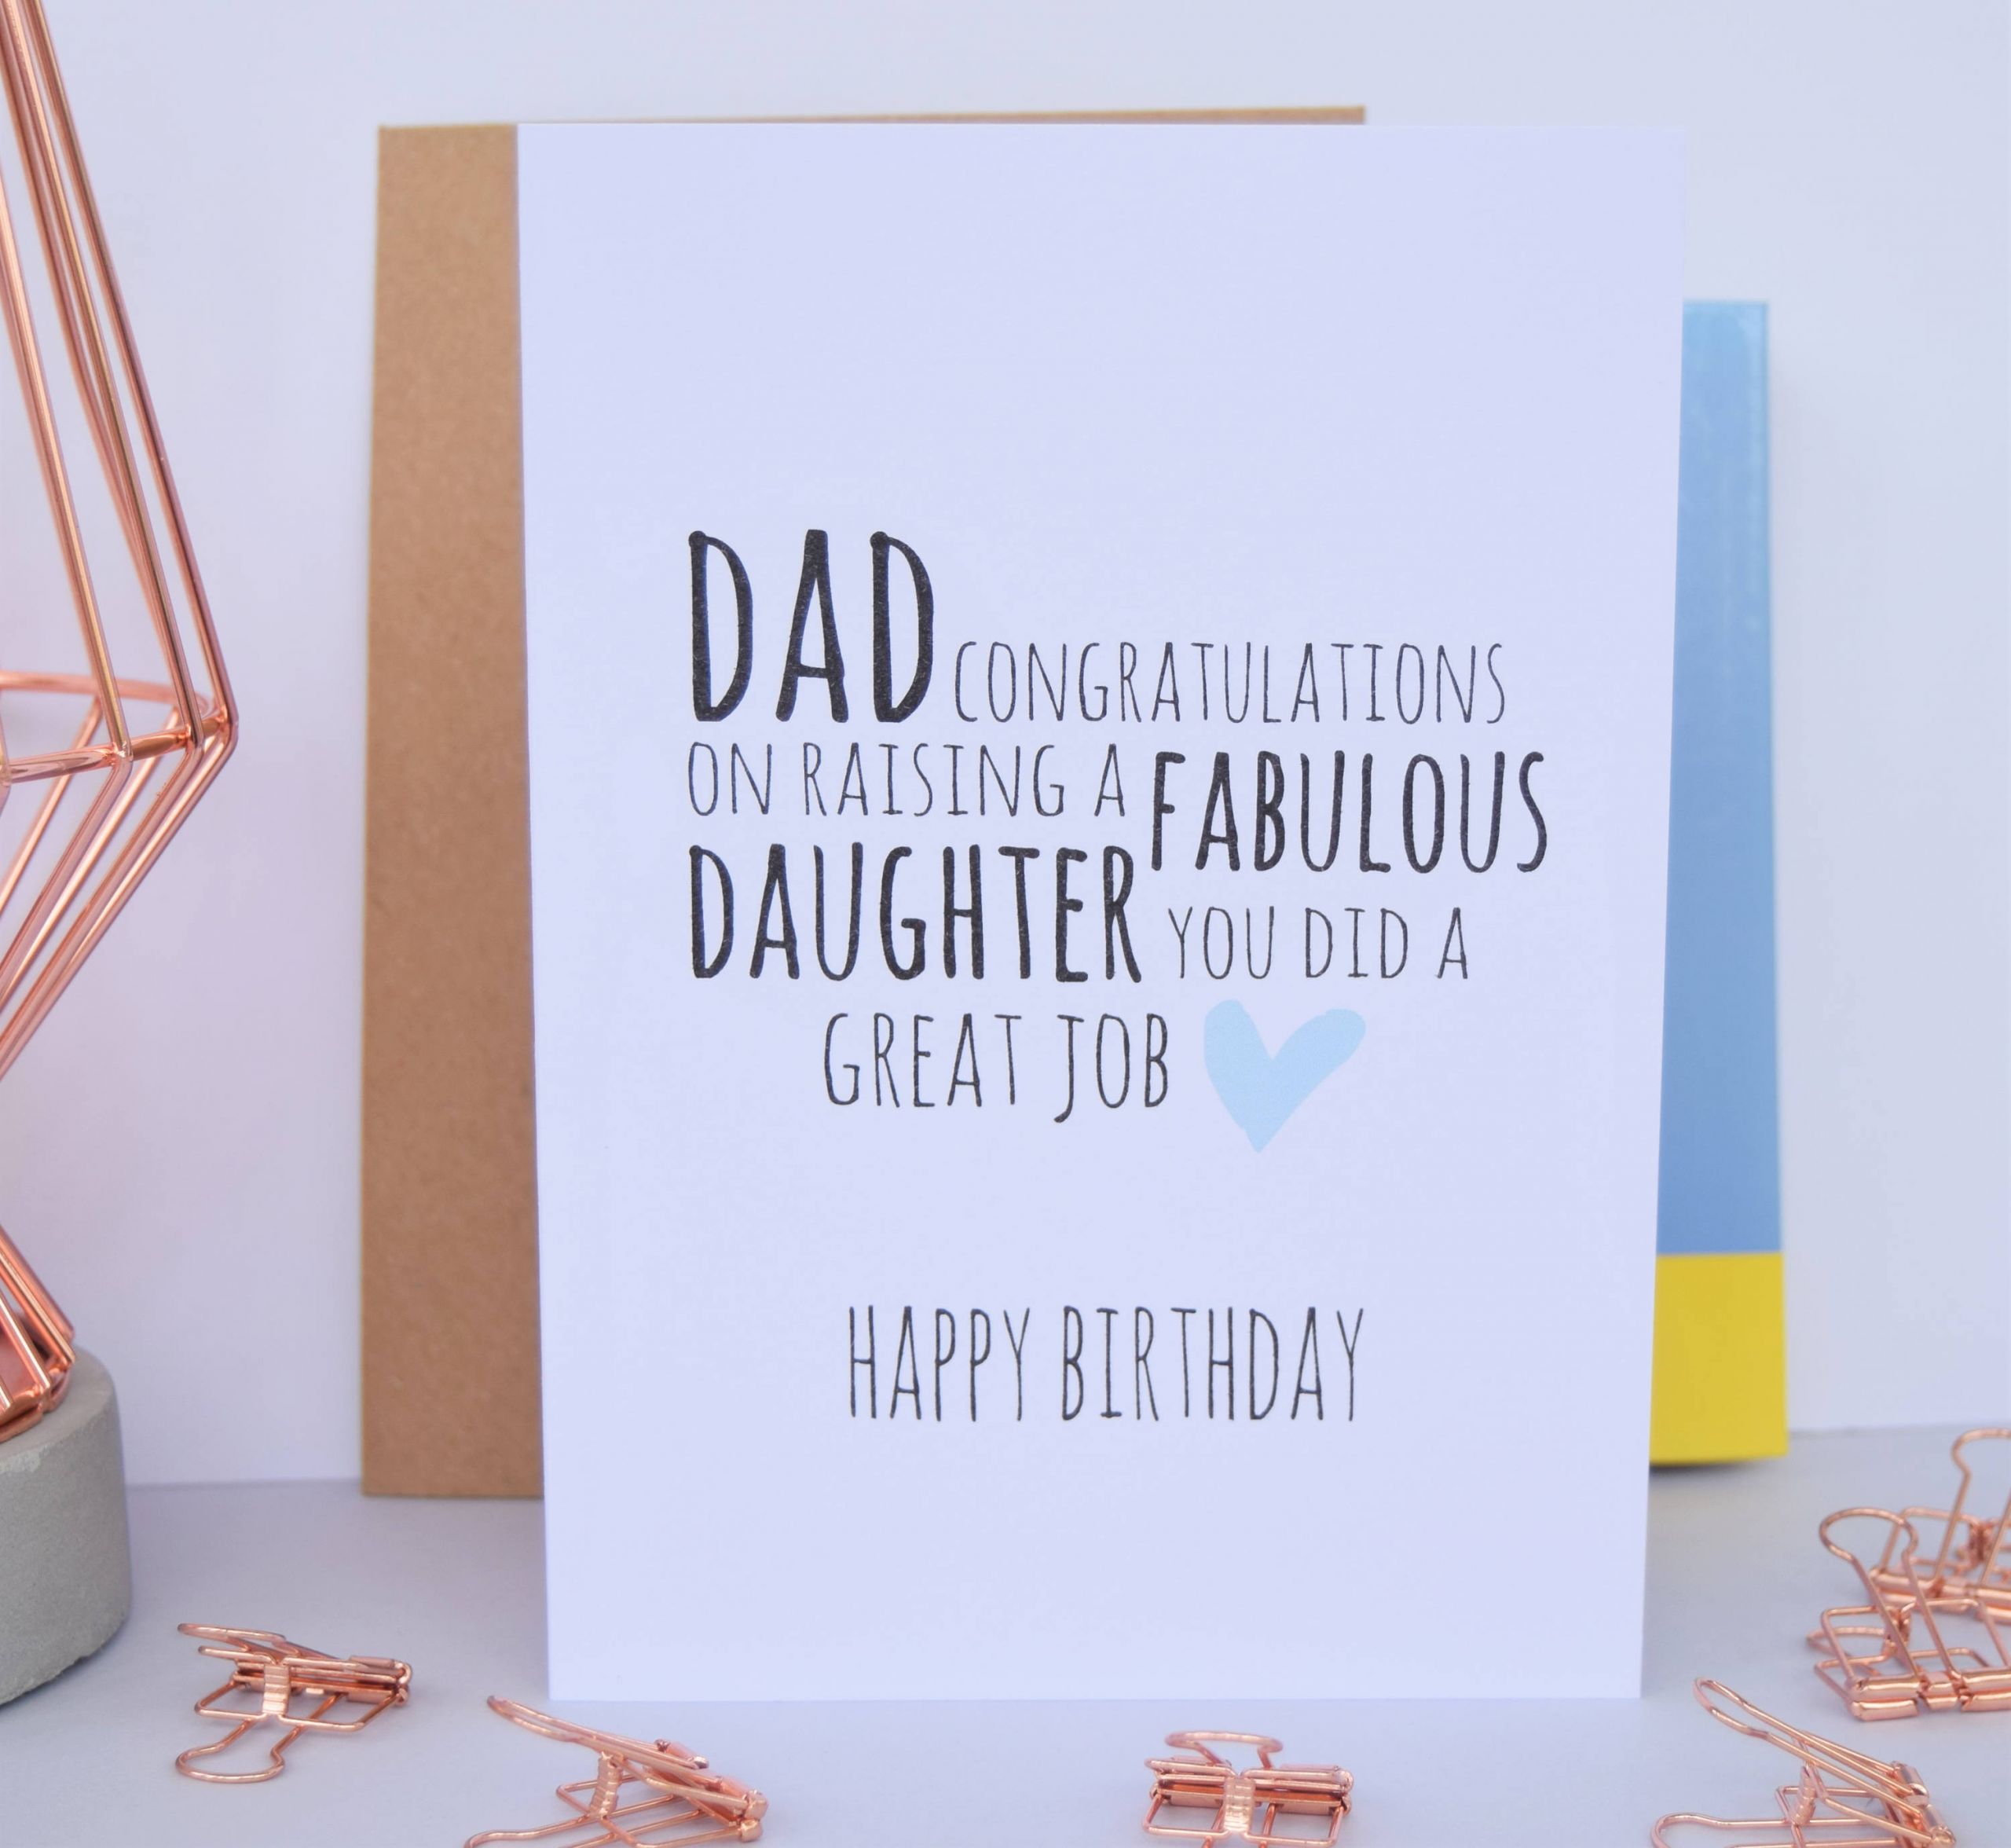 The top 22 Ideas About Birthday Cards for Dad From Daughter - Home ...